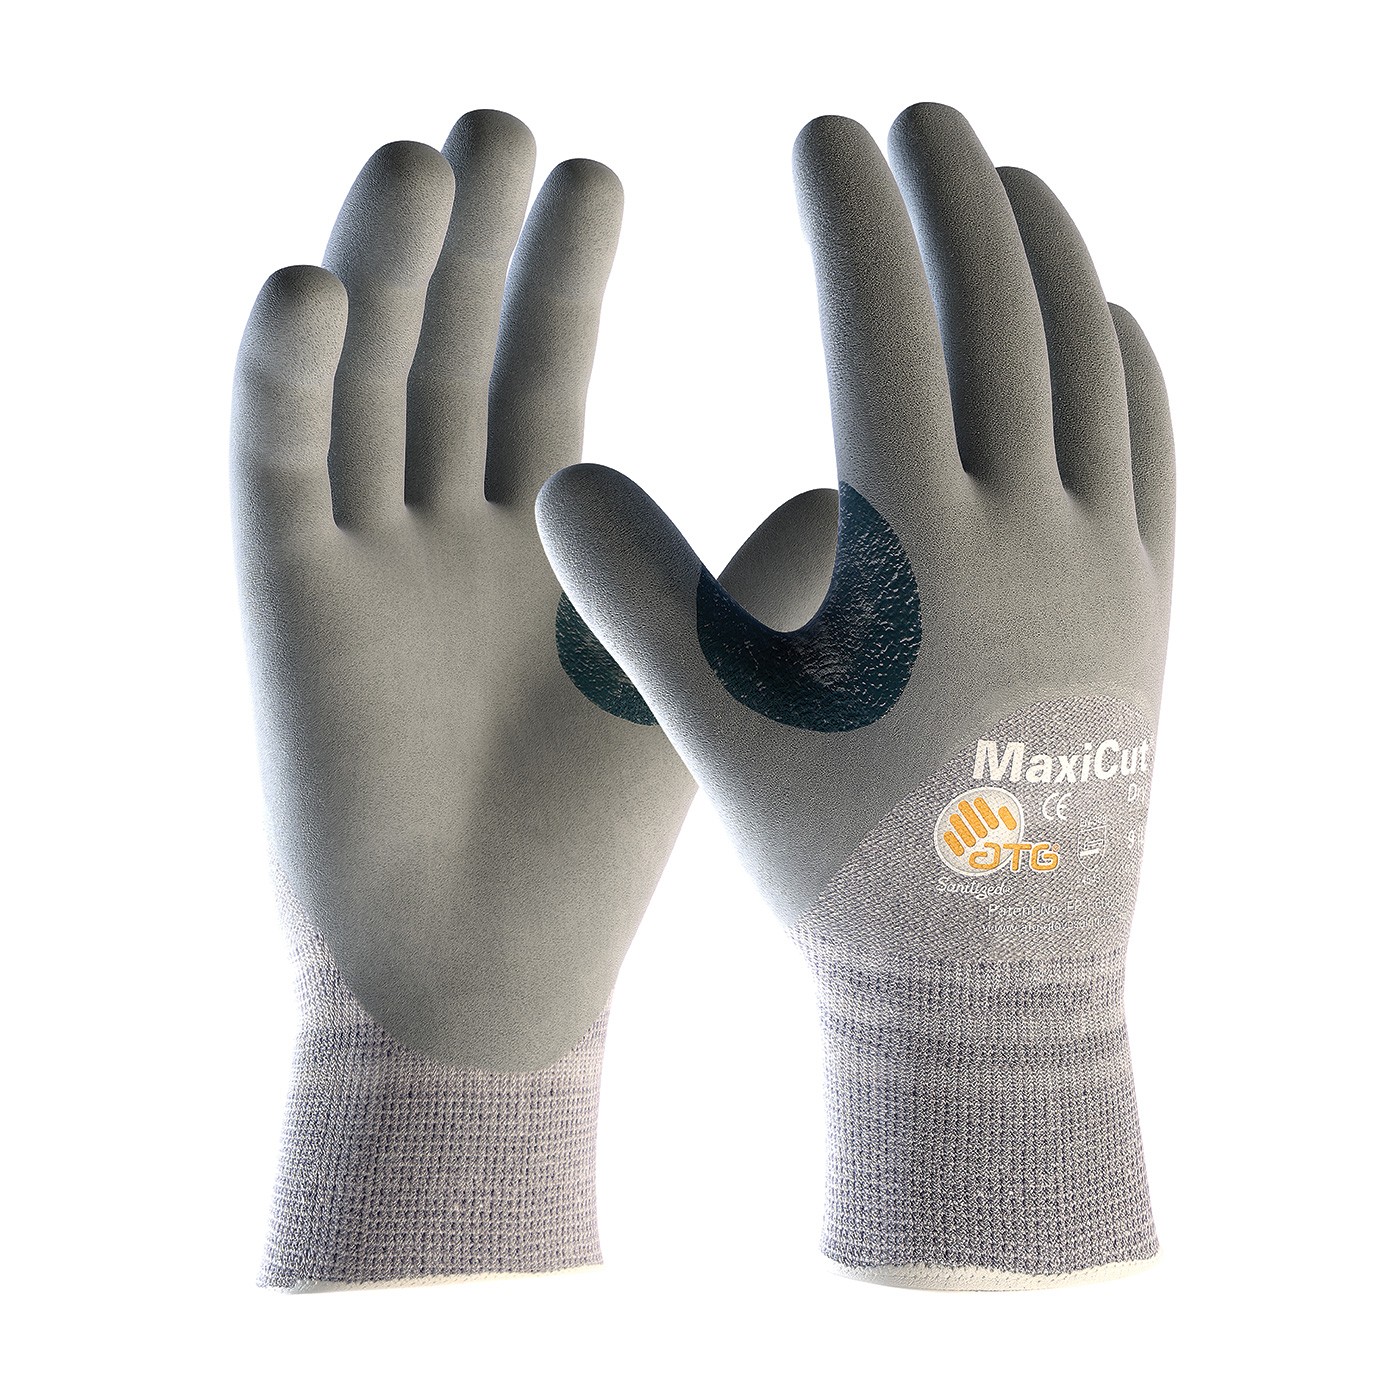 MaxiCut® Dry Seamless Knit Dyneema® / Engineered Yarns Glove with Nitrile Coated Foam Grip on Palm, Fingers & Knuckles (#19-D475)